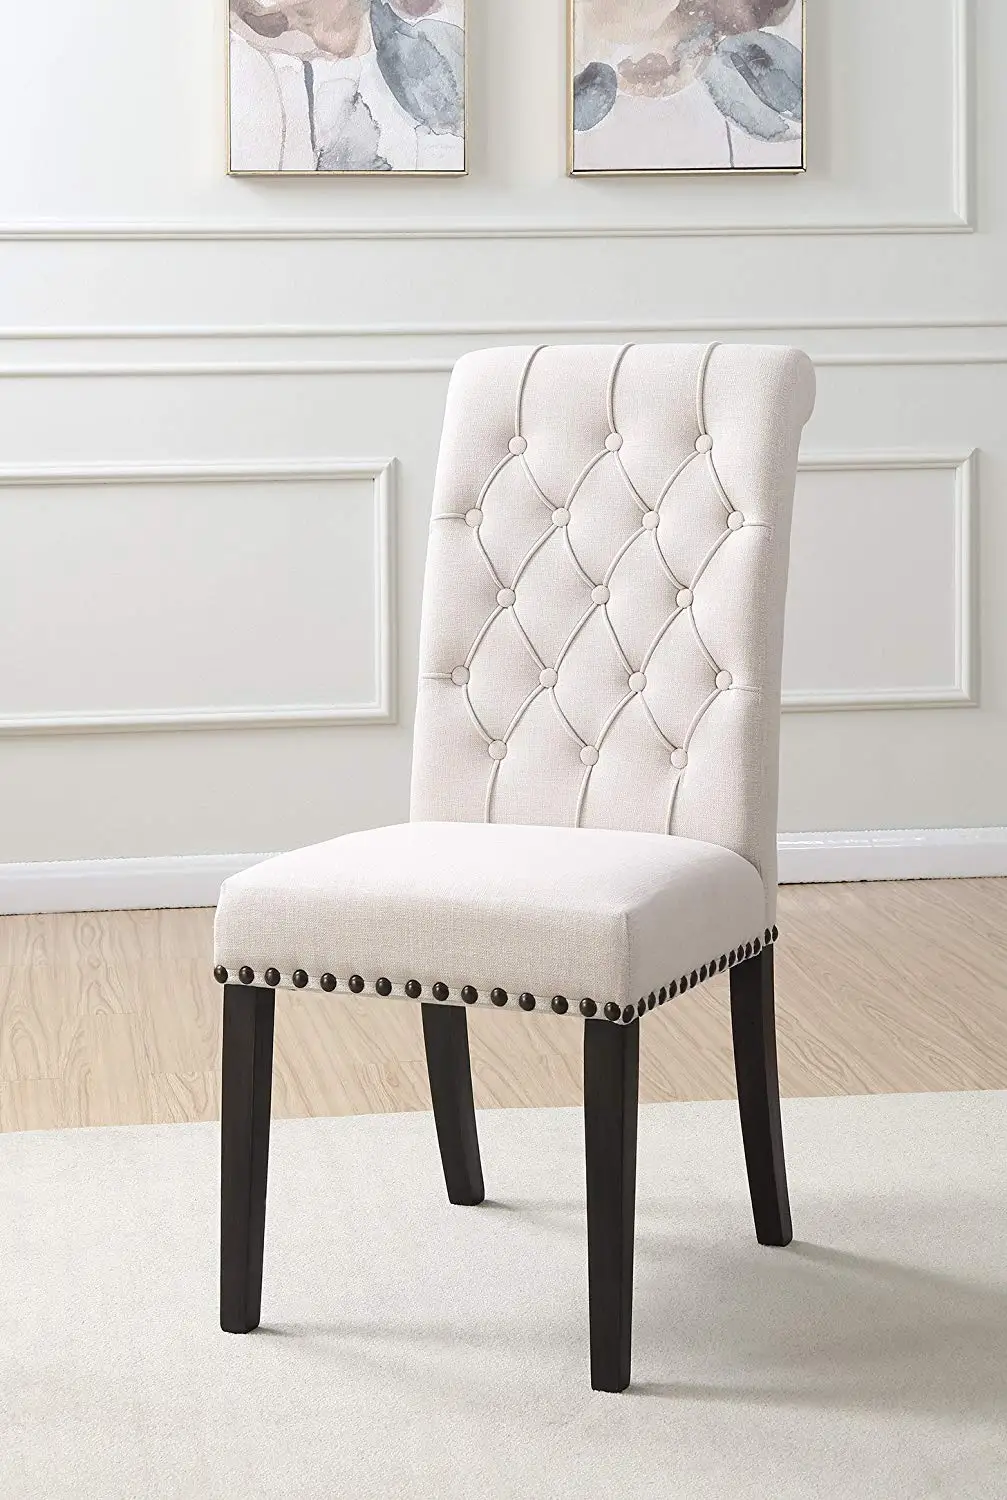 Cheap Dining Chair, find Dining Chair deals on line at Alibaba.com